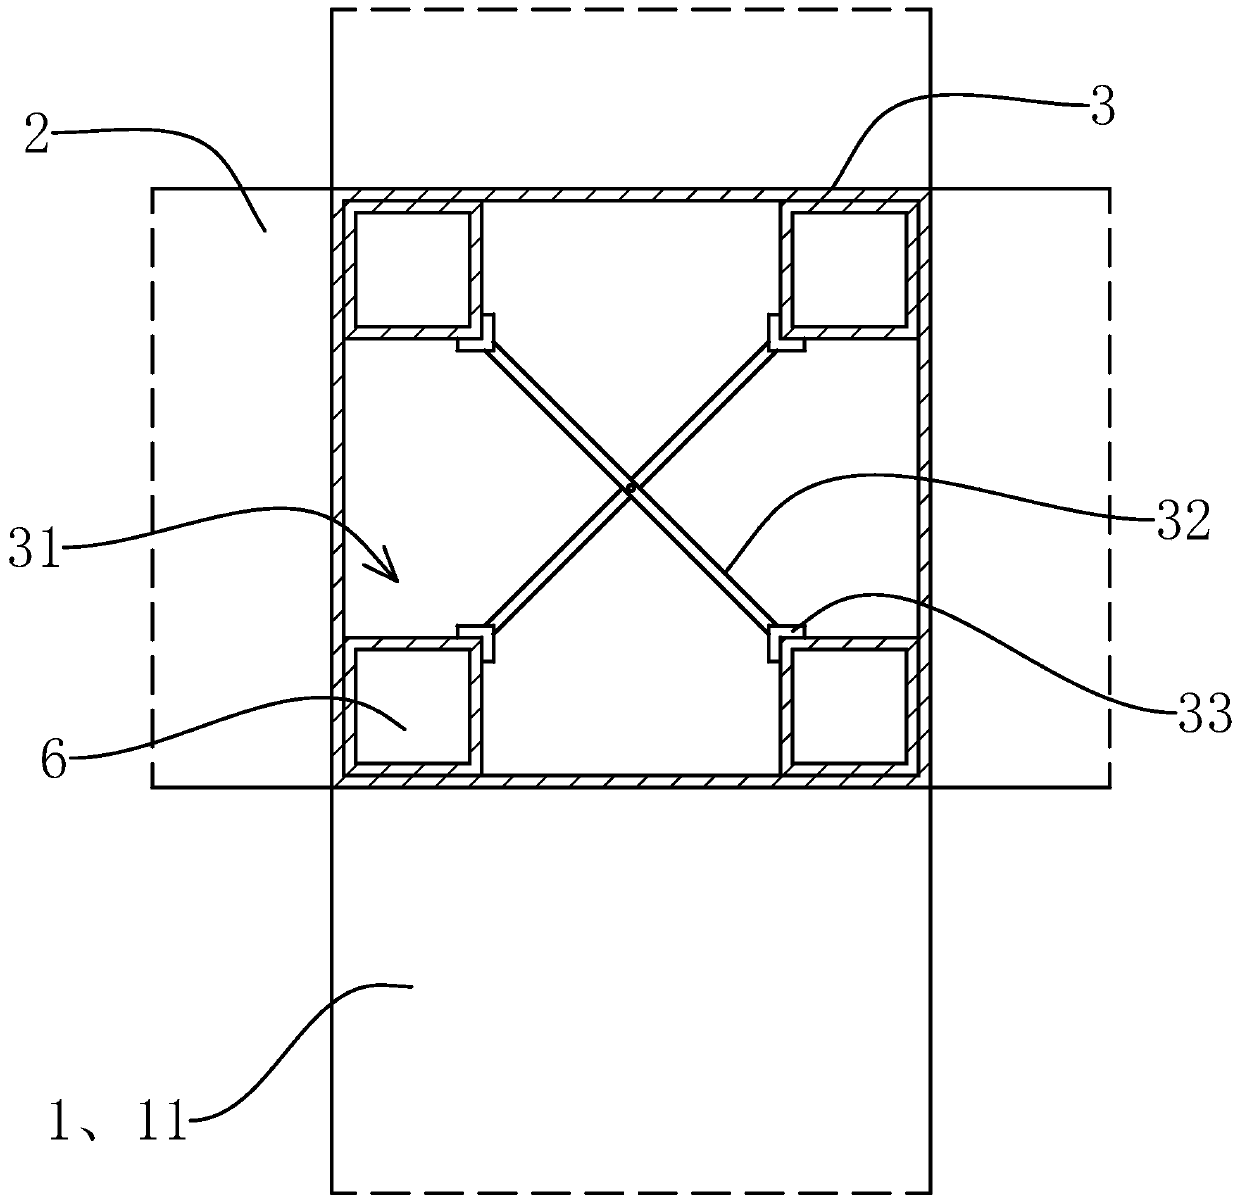 Beam and column connecting structure